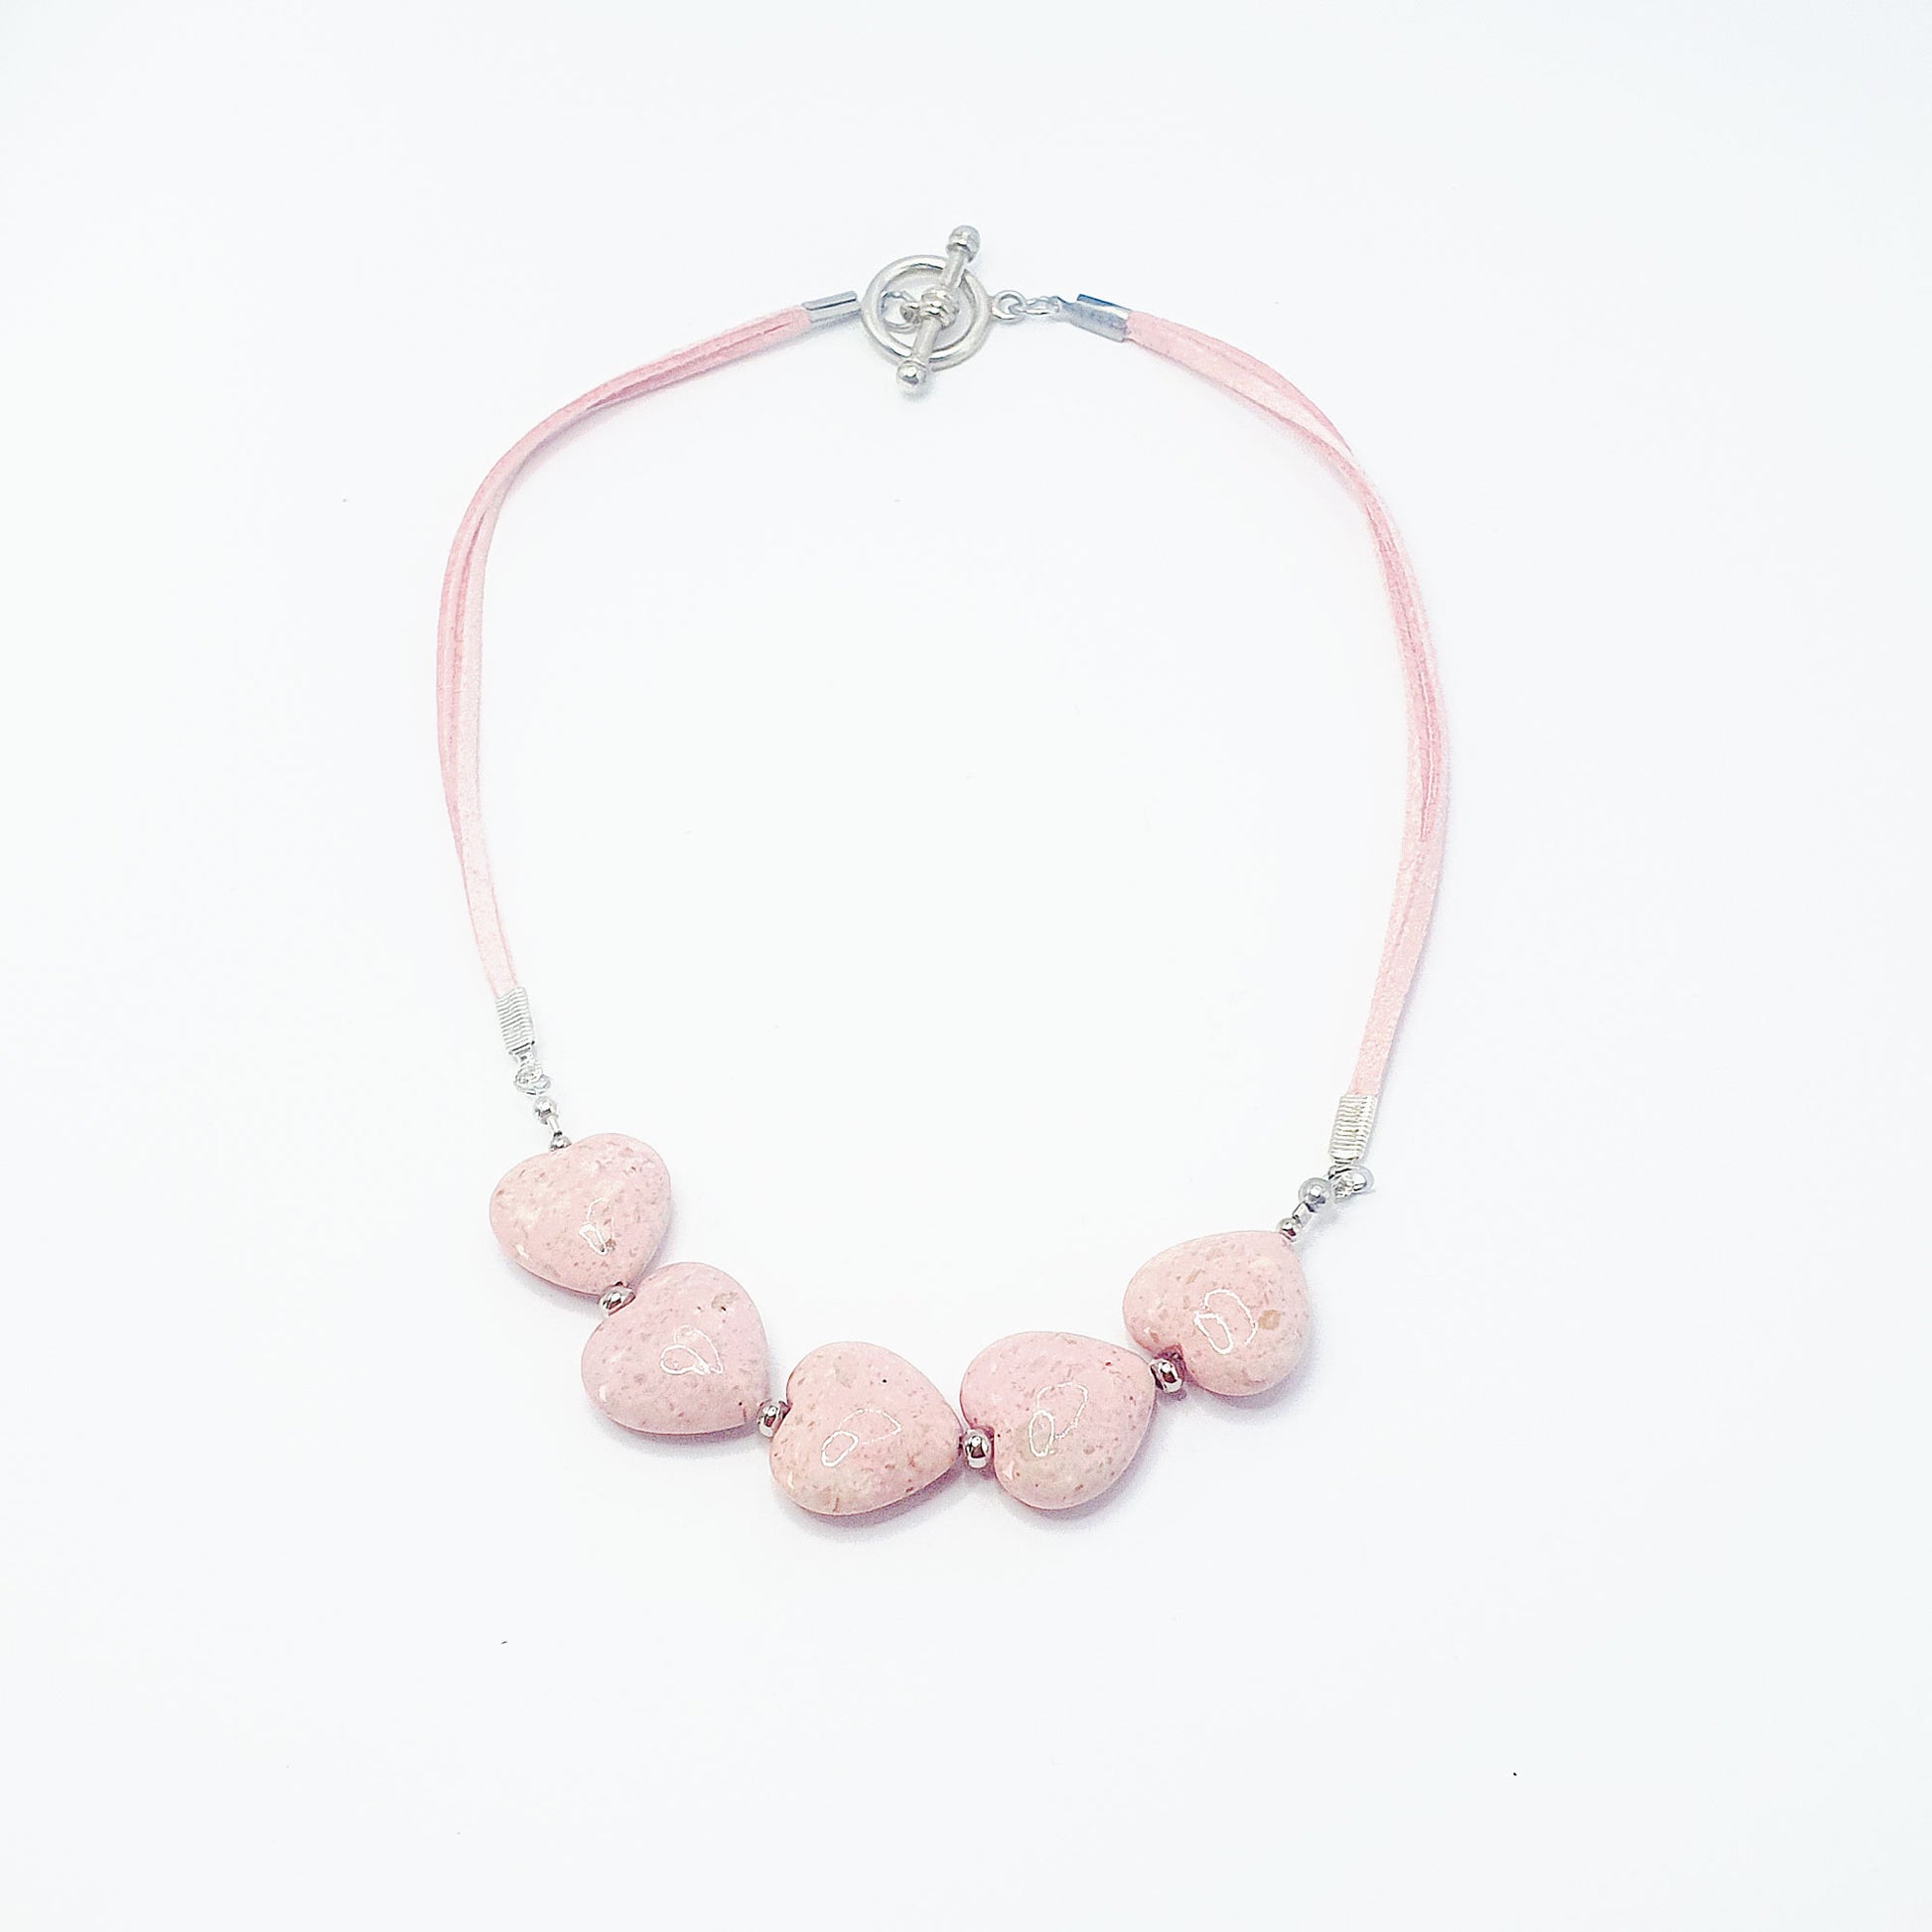 Fossil heart necklace in pale pink